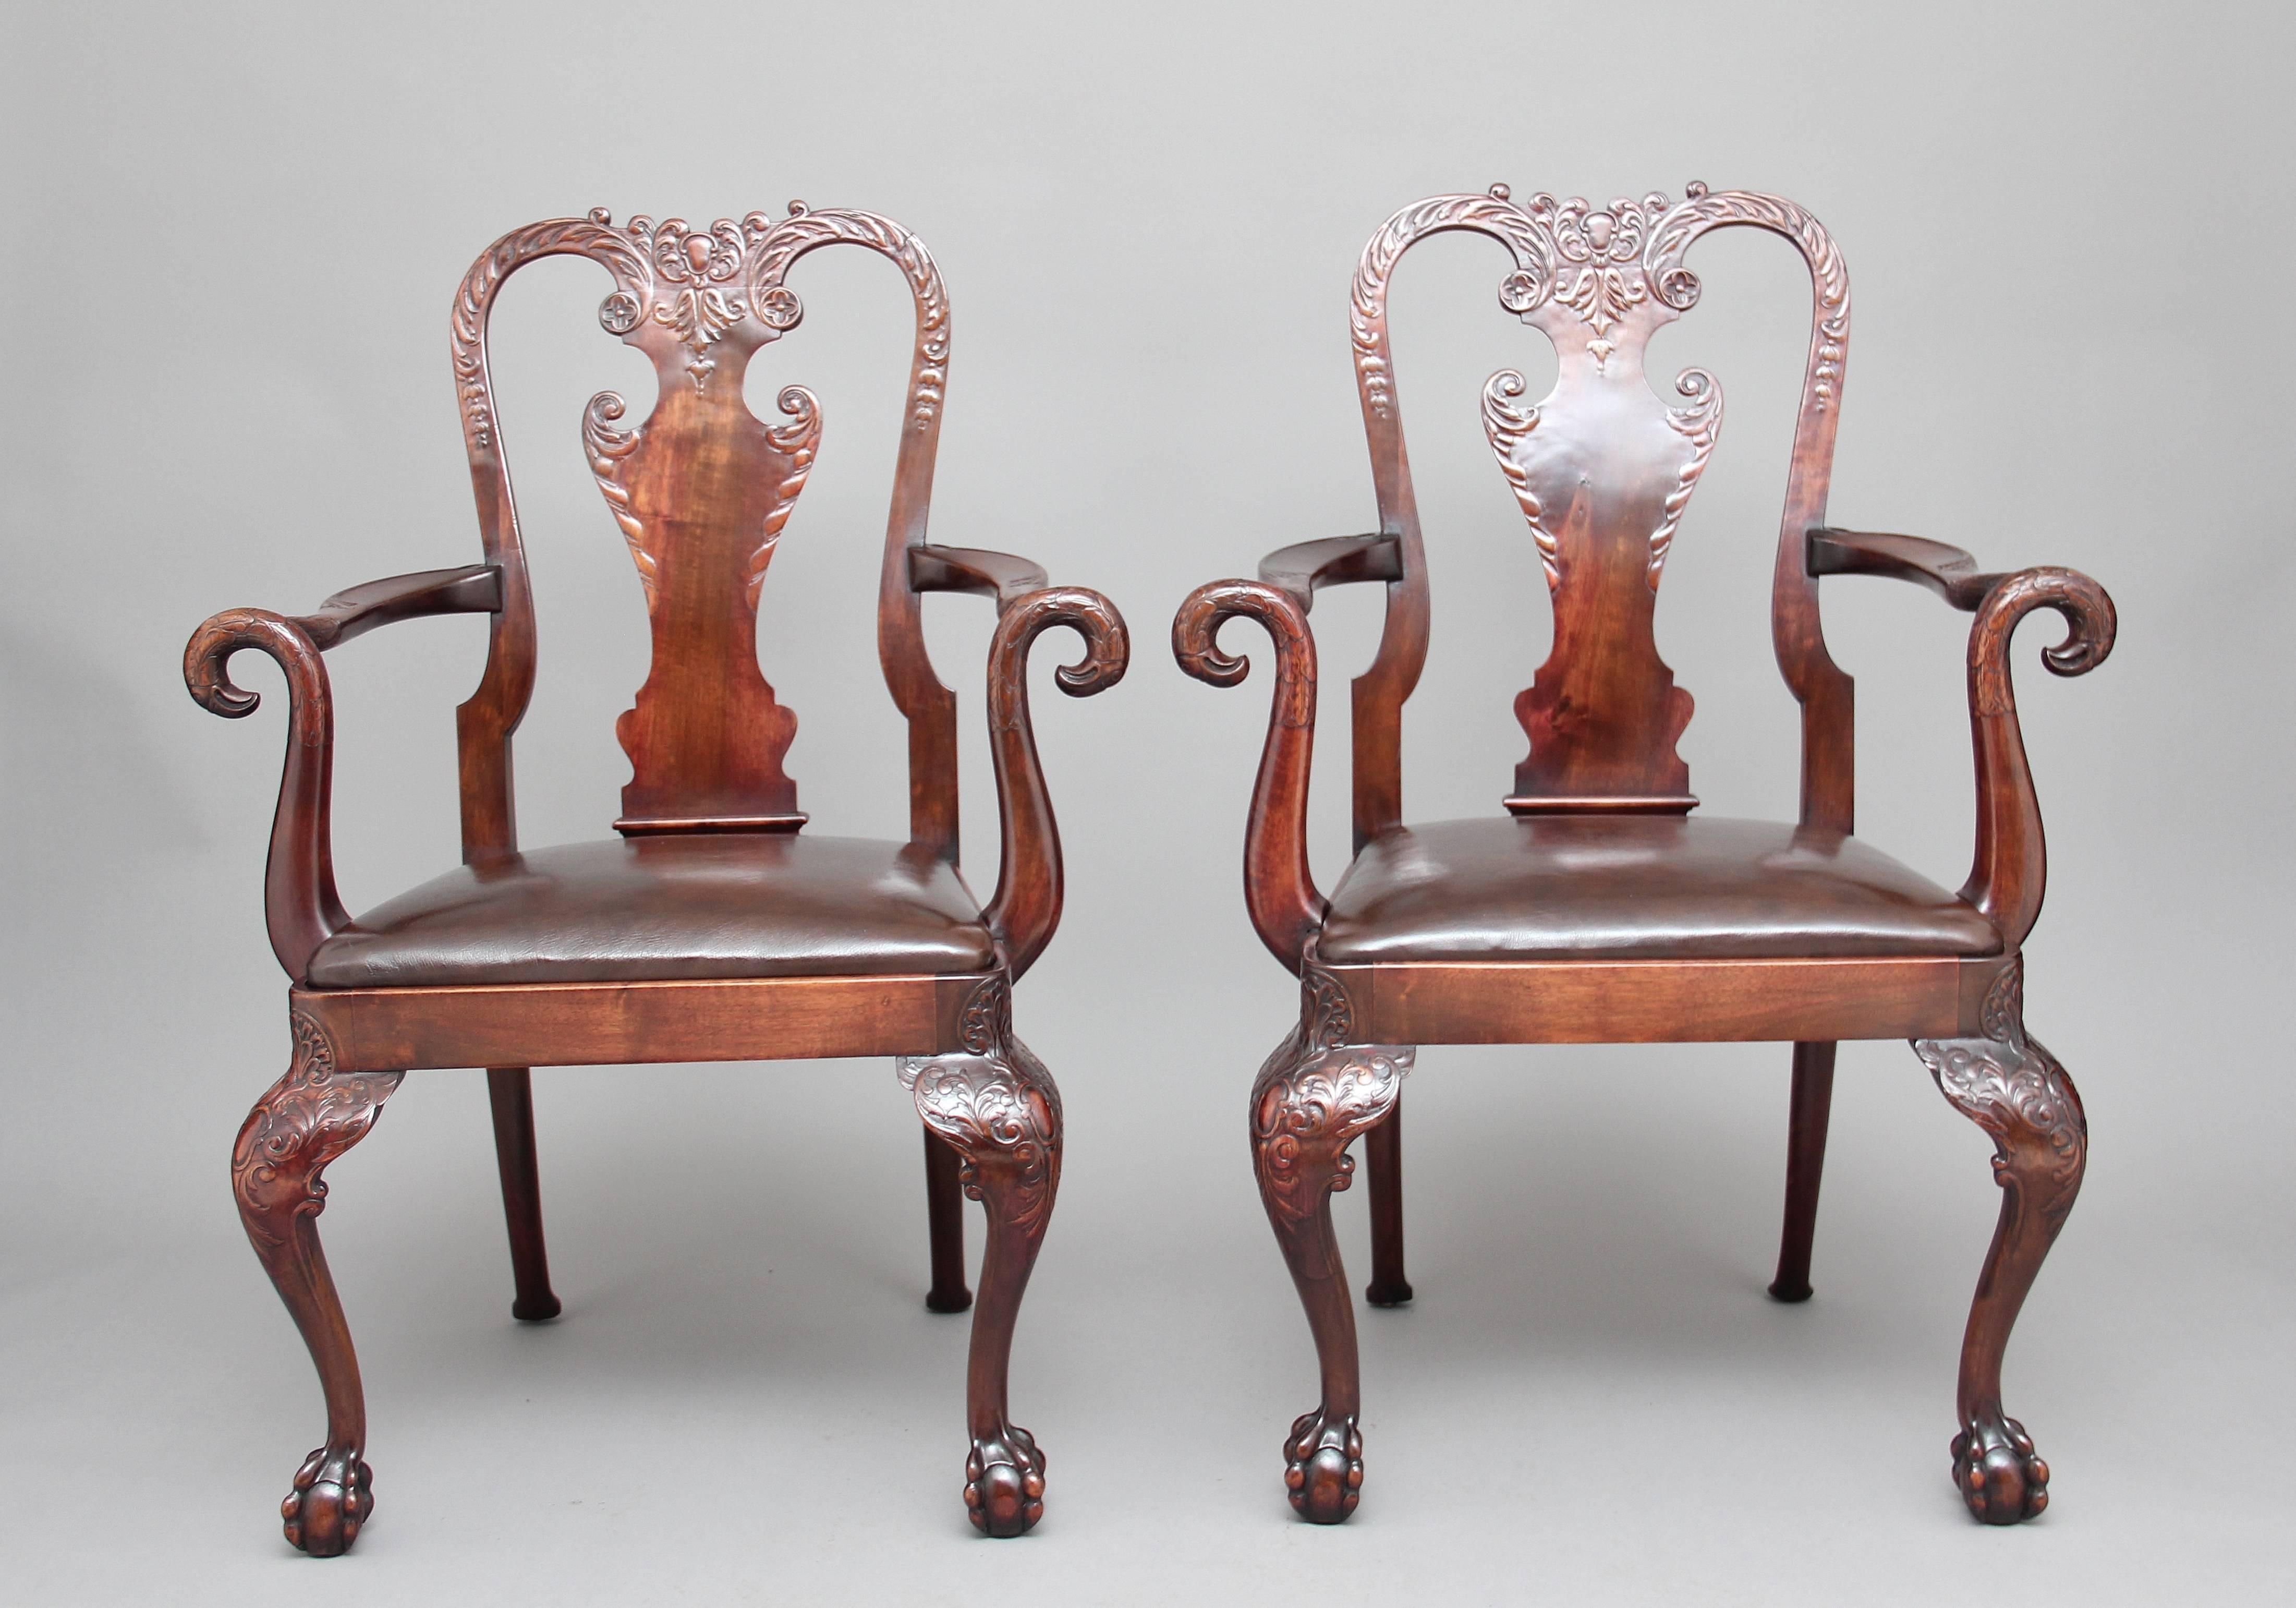 A remarkable pair of 19th century mahogany armchairs in the 18th century style, with an ornate carved back with a central vase shape with carved scroll decoration, with elegant carved arm supports with stylized birds heads, a brown leather drop in